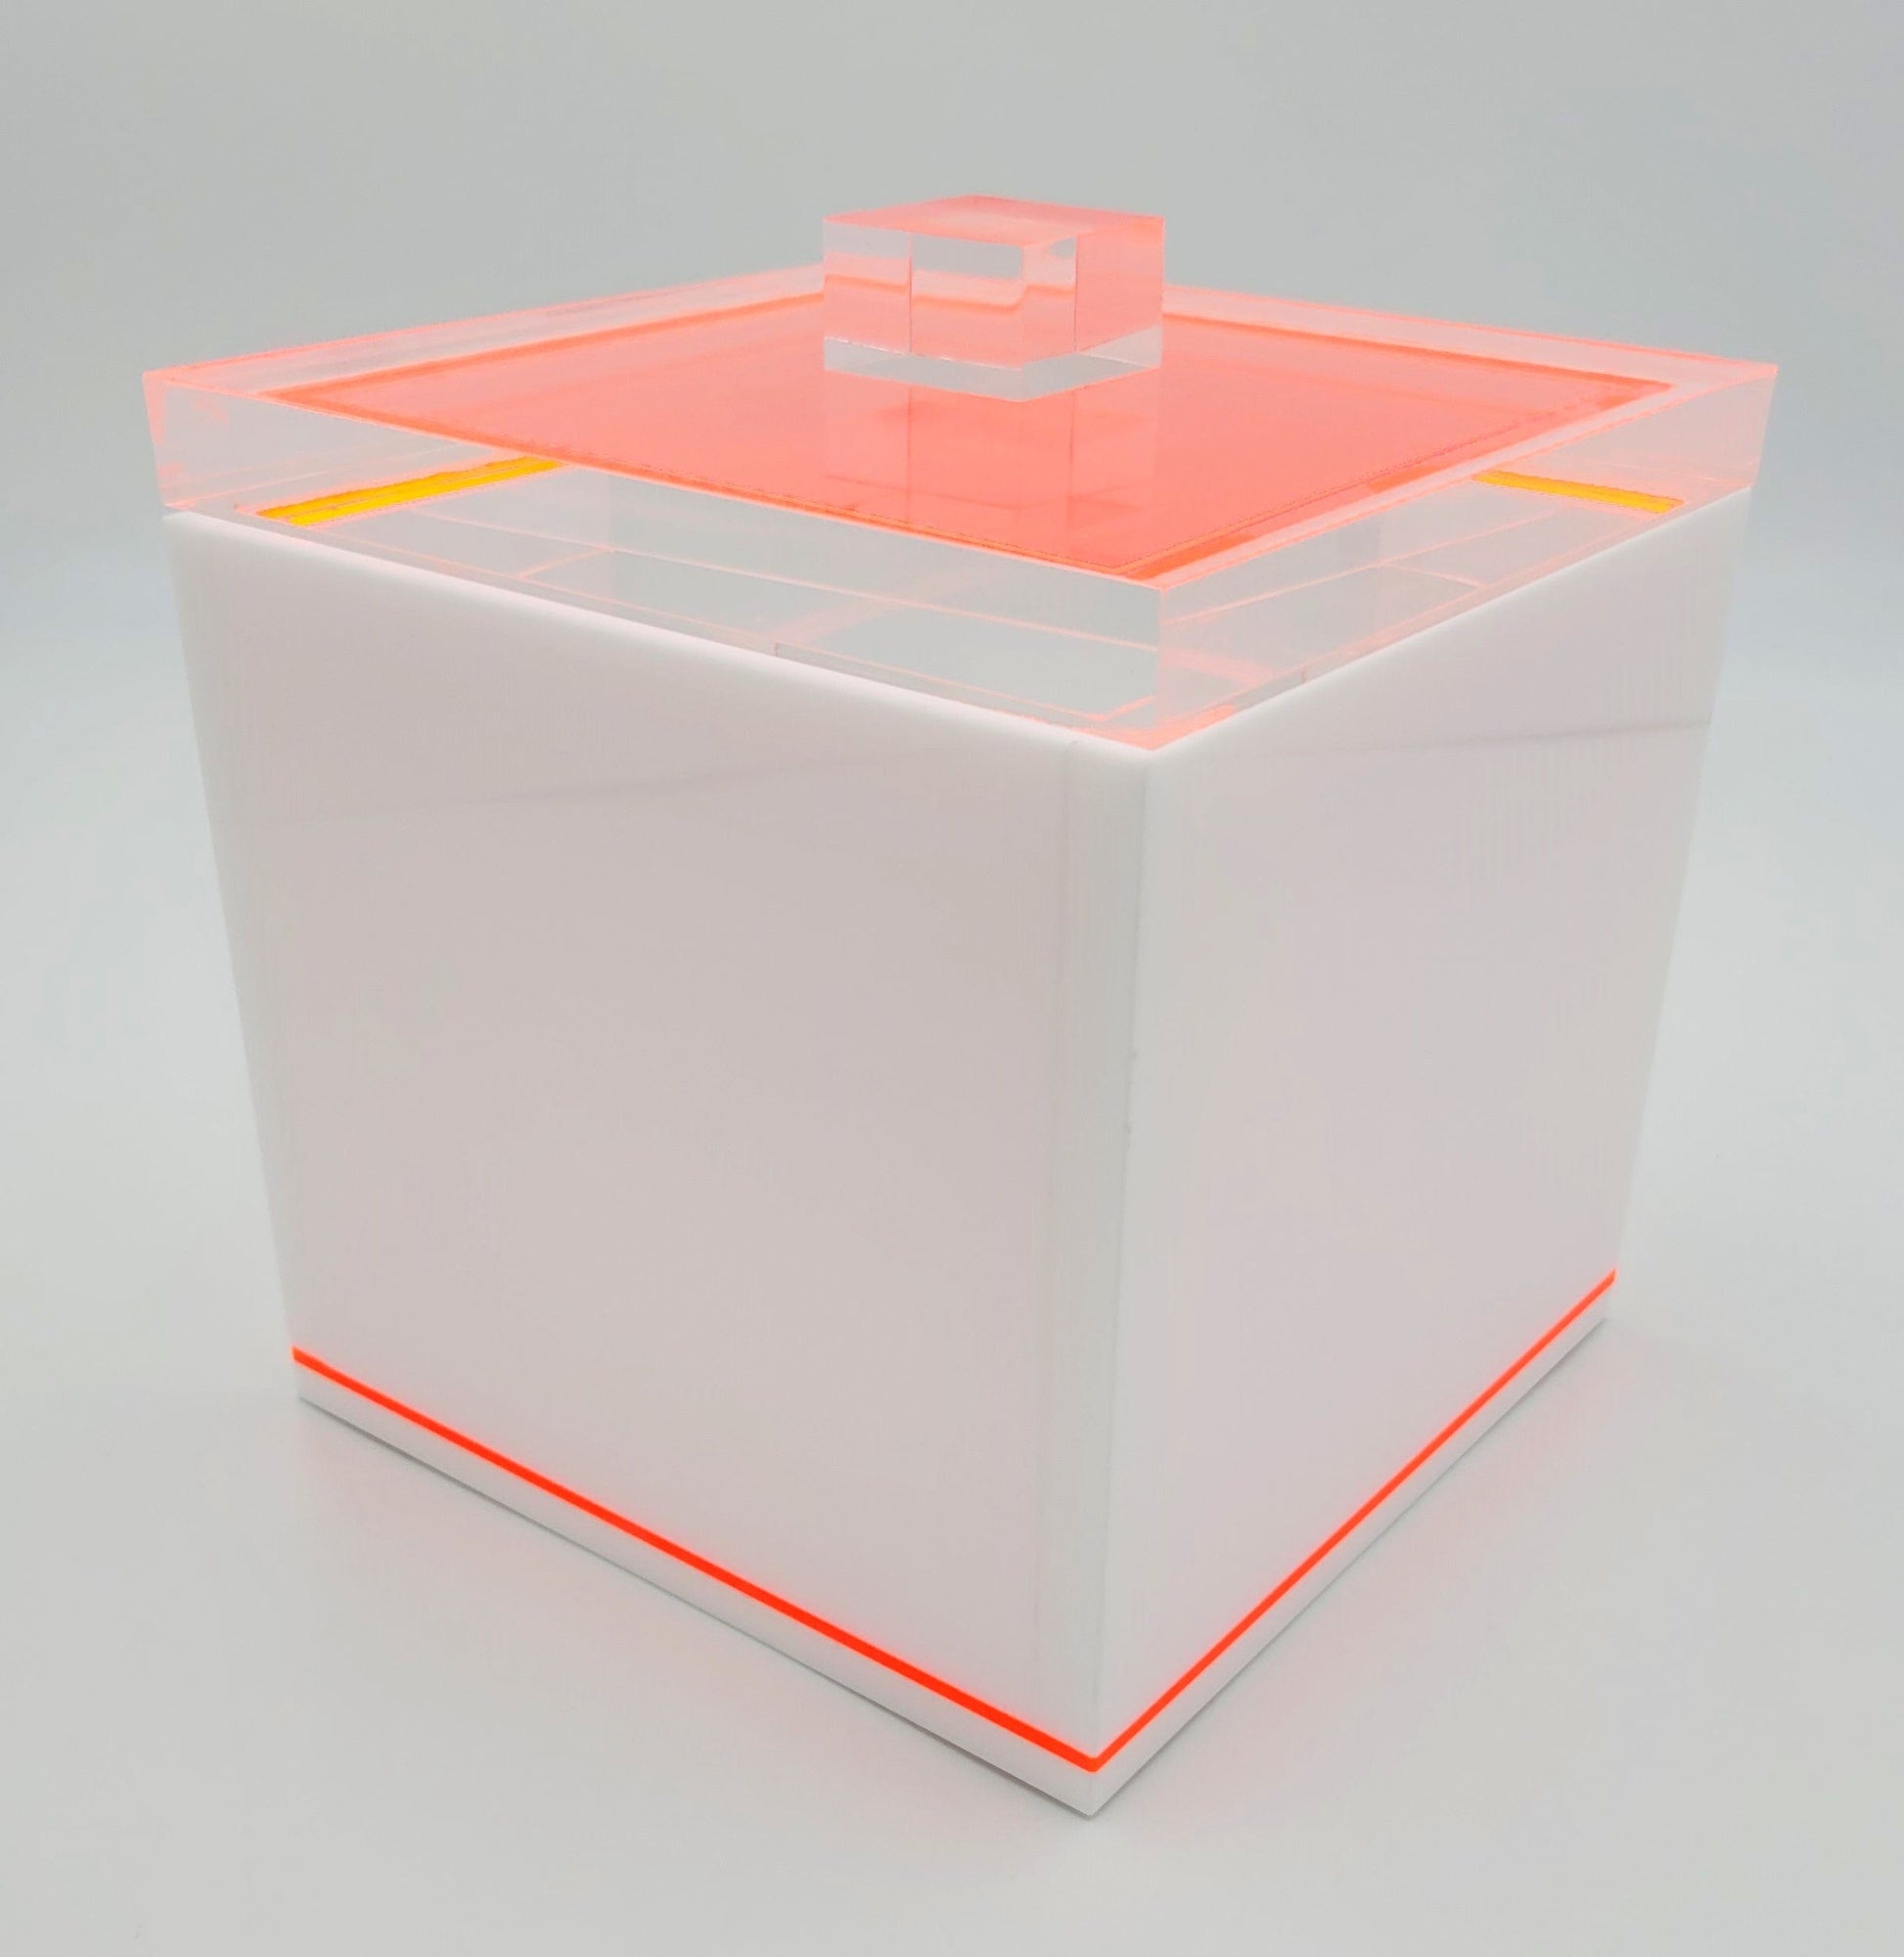 Tinsley Mortimer Ice Bucket Neon Pink White Solid Lucite Ice Bucket #4